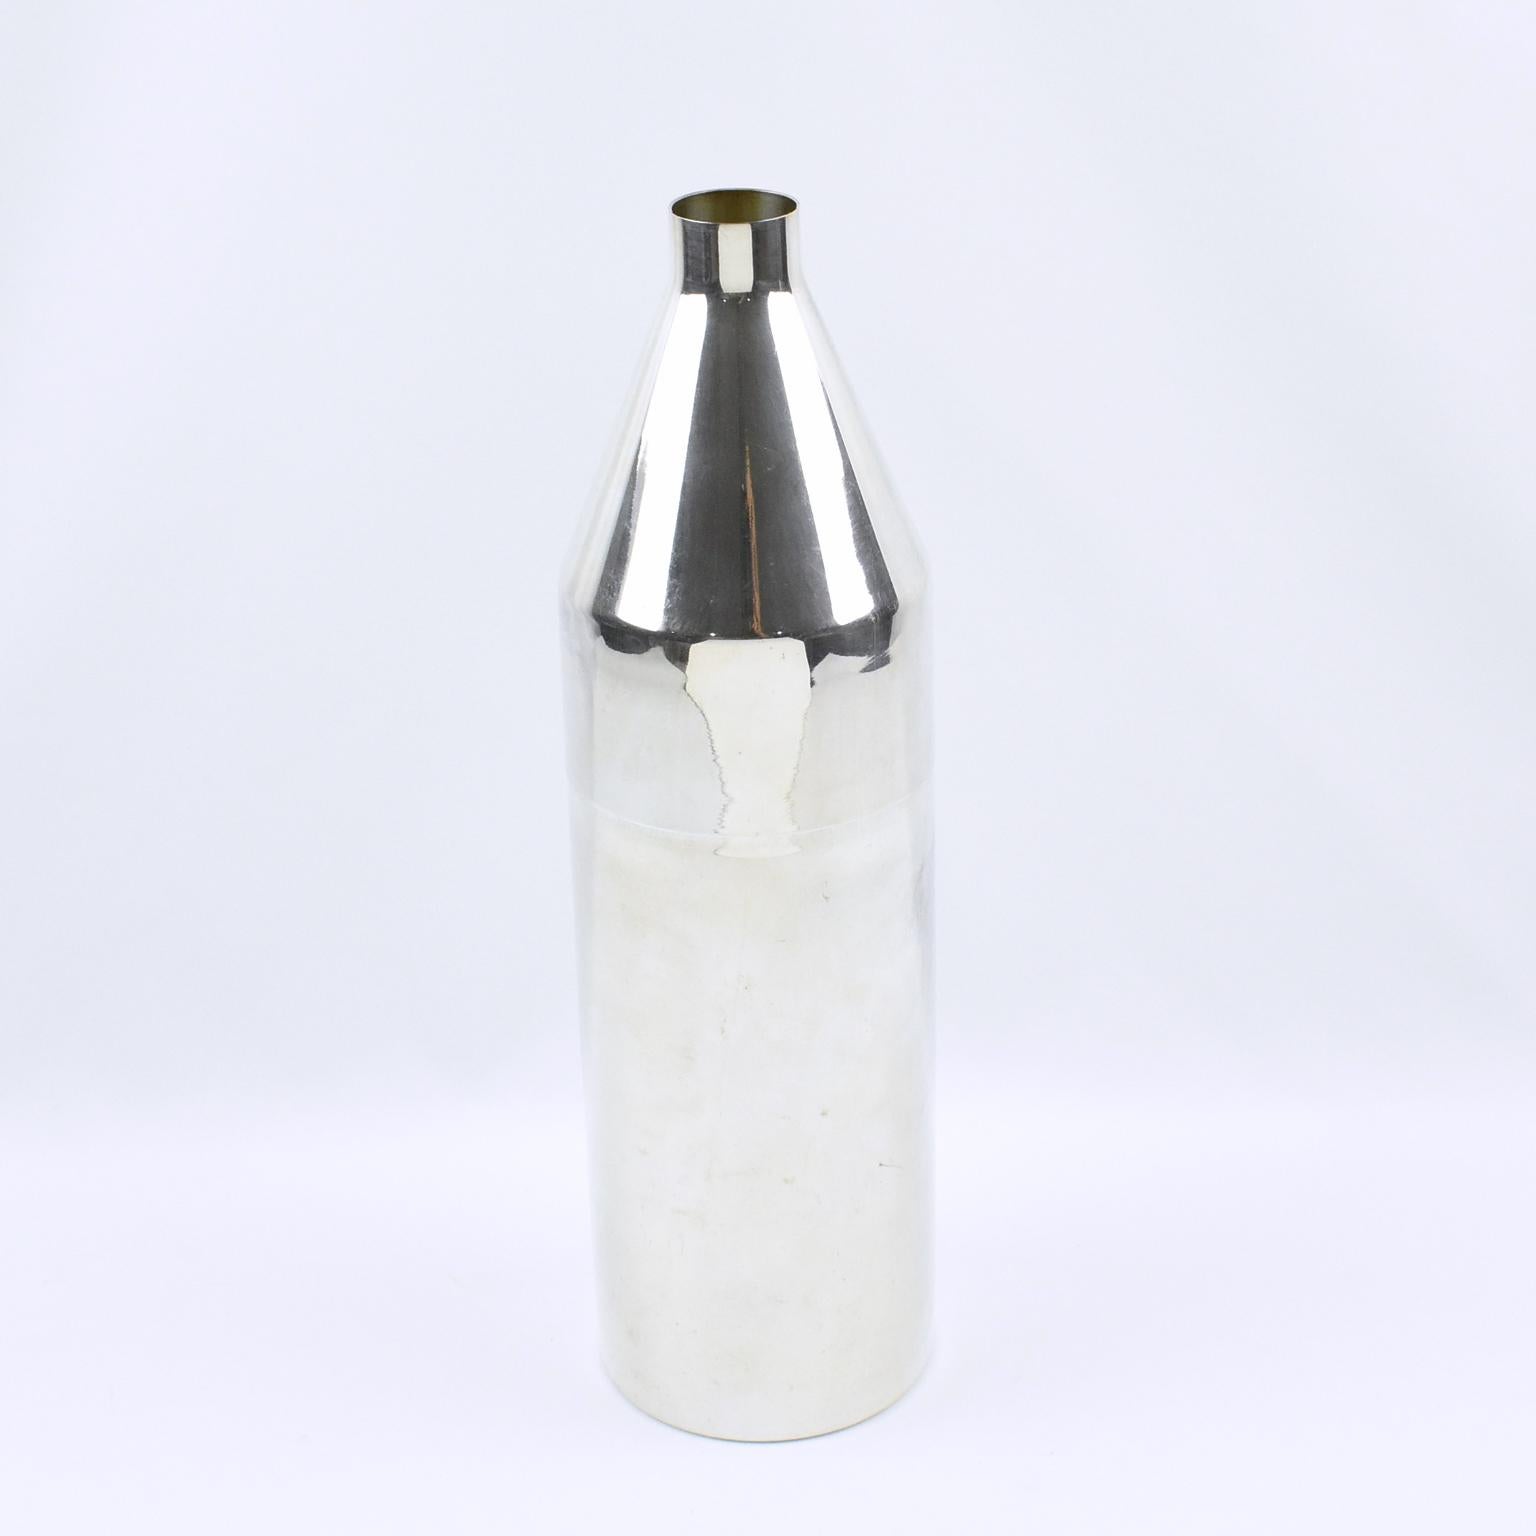 Lovely Art Deco barware accessory, silver plate wine bottle cooler by SFAM, Paris. Streamline design with sleek lines. The cooler splits in two sections to receive the wine bottle as shown on pictures. Marked underside with silversmith legal